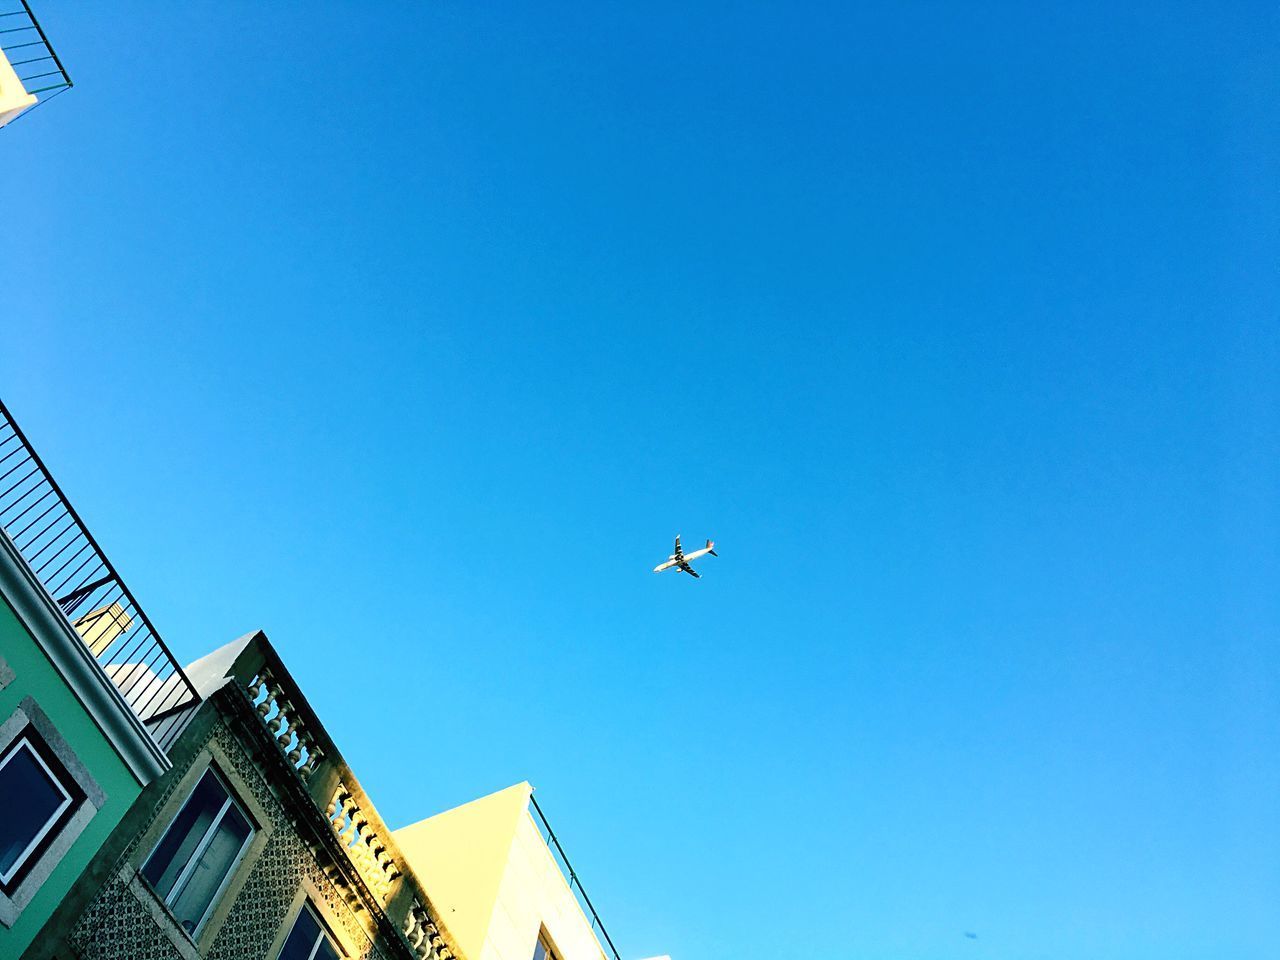 LOW ANGLE VIEW OF AIRPLANE FLYING AGAINST CLEAR SKY